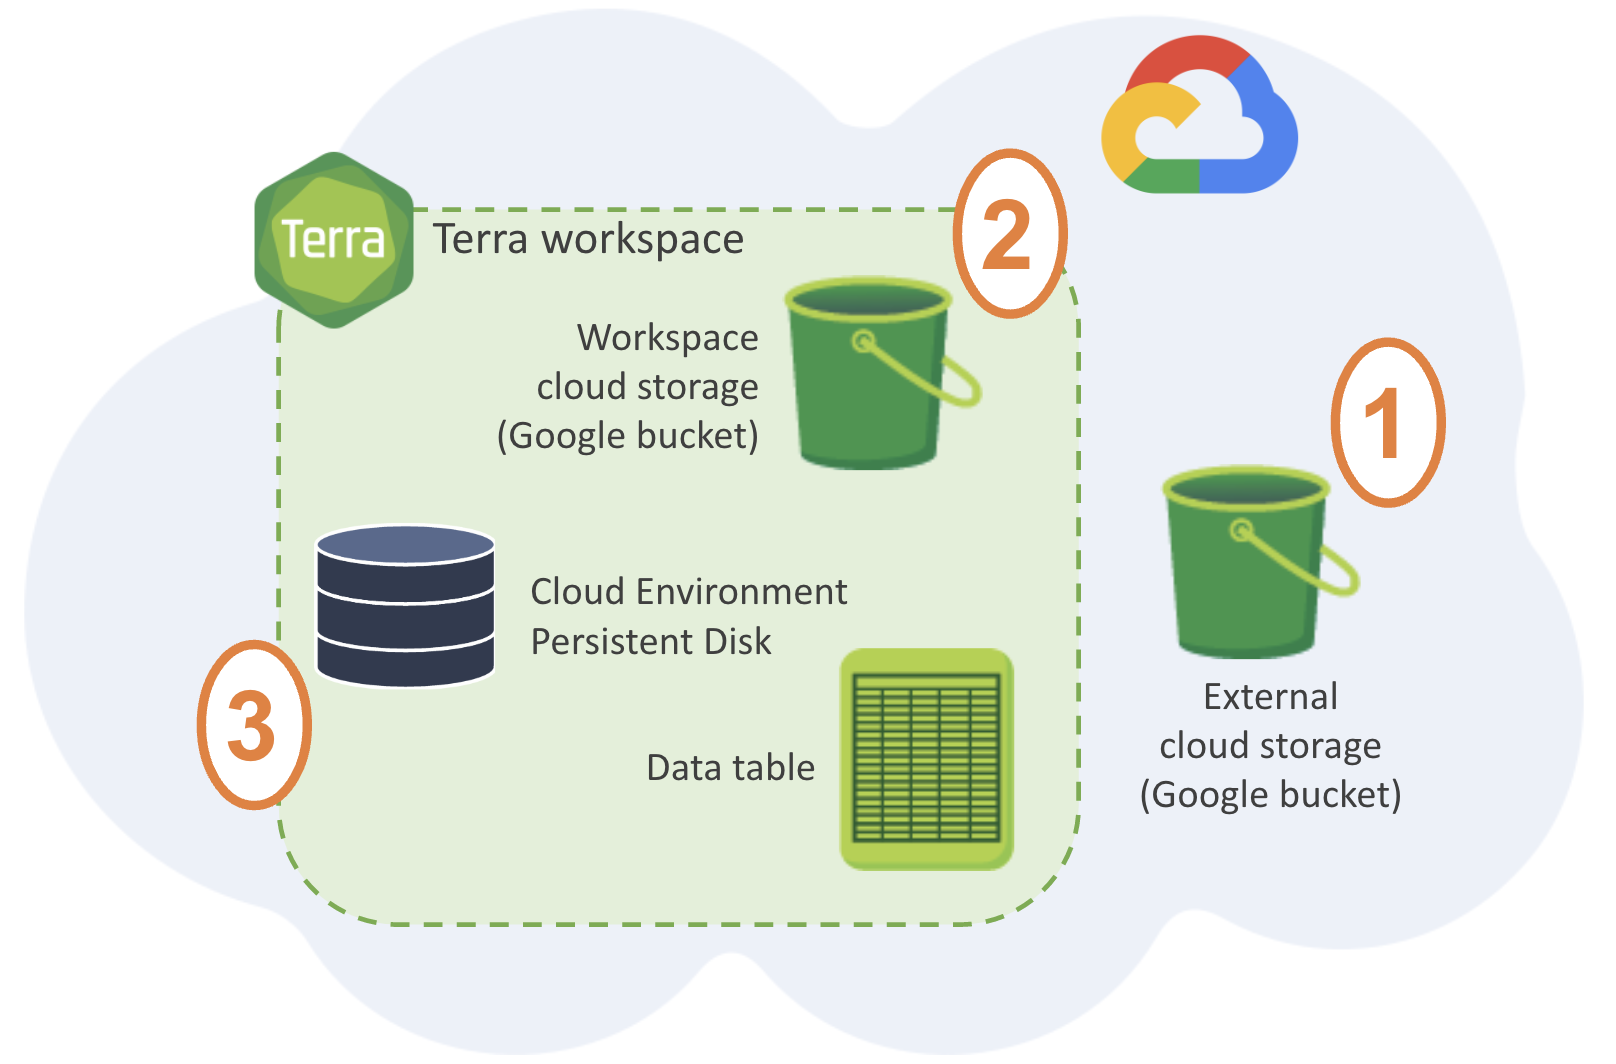 diagram of data in the cloud in Terra. The cloud is public GCP infrastructure - noted by a cloud shape and Google logo. An external Google bucket is labeled with a one. Within the Google cloud is a Terra workspace, which includes workspace storage (dedicated Google bucket) labeled two. A persistent disk, labeled three, is also located inside the workspace perimeter.